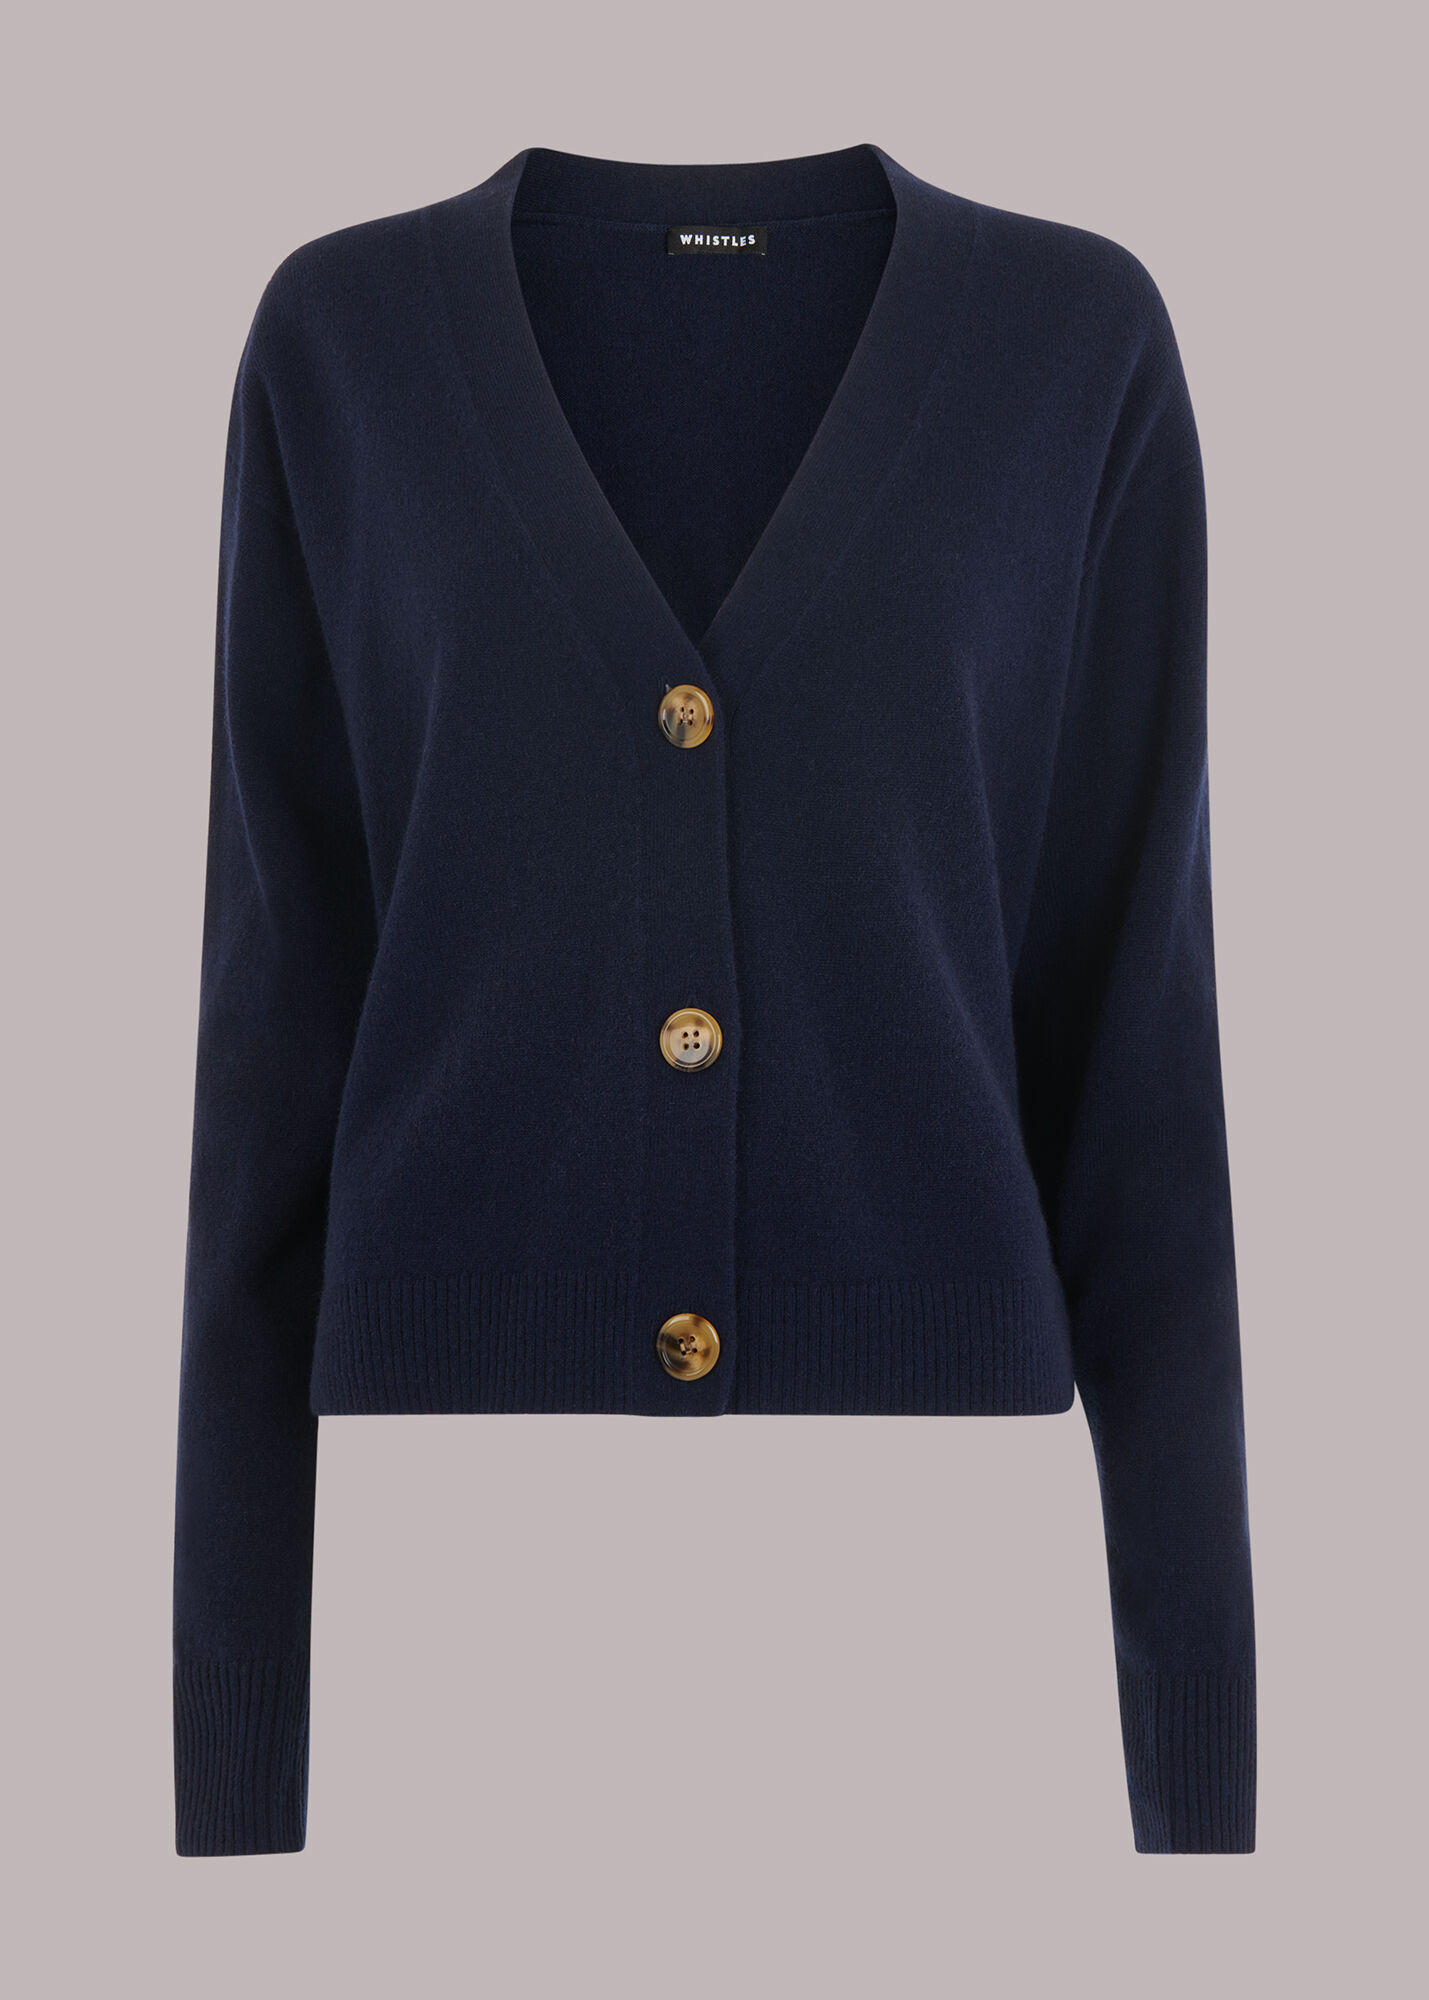 Navy Cashmere Cardigan | WHISTLES